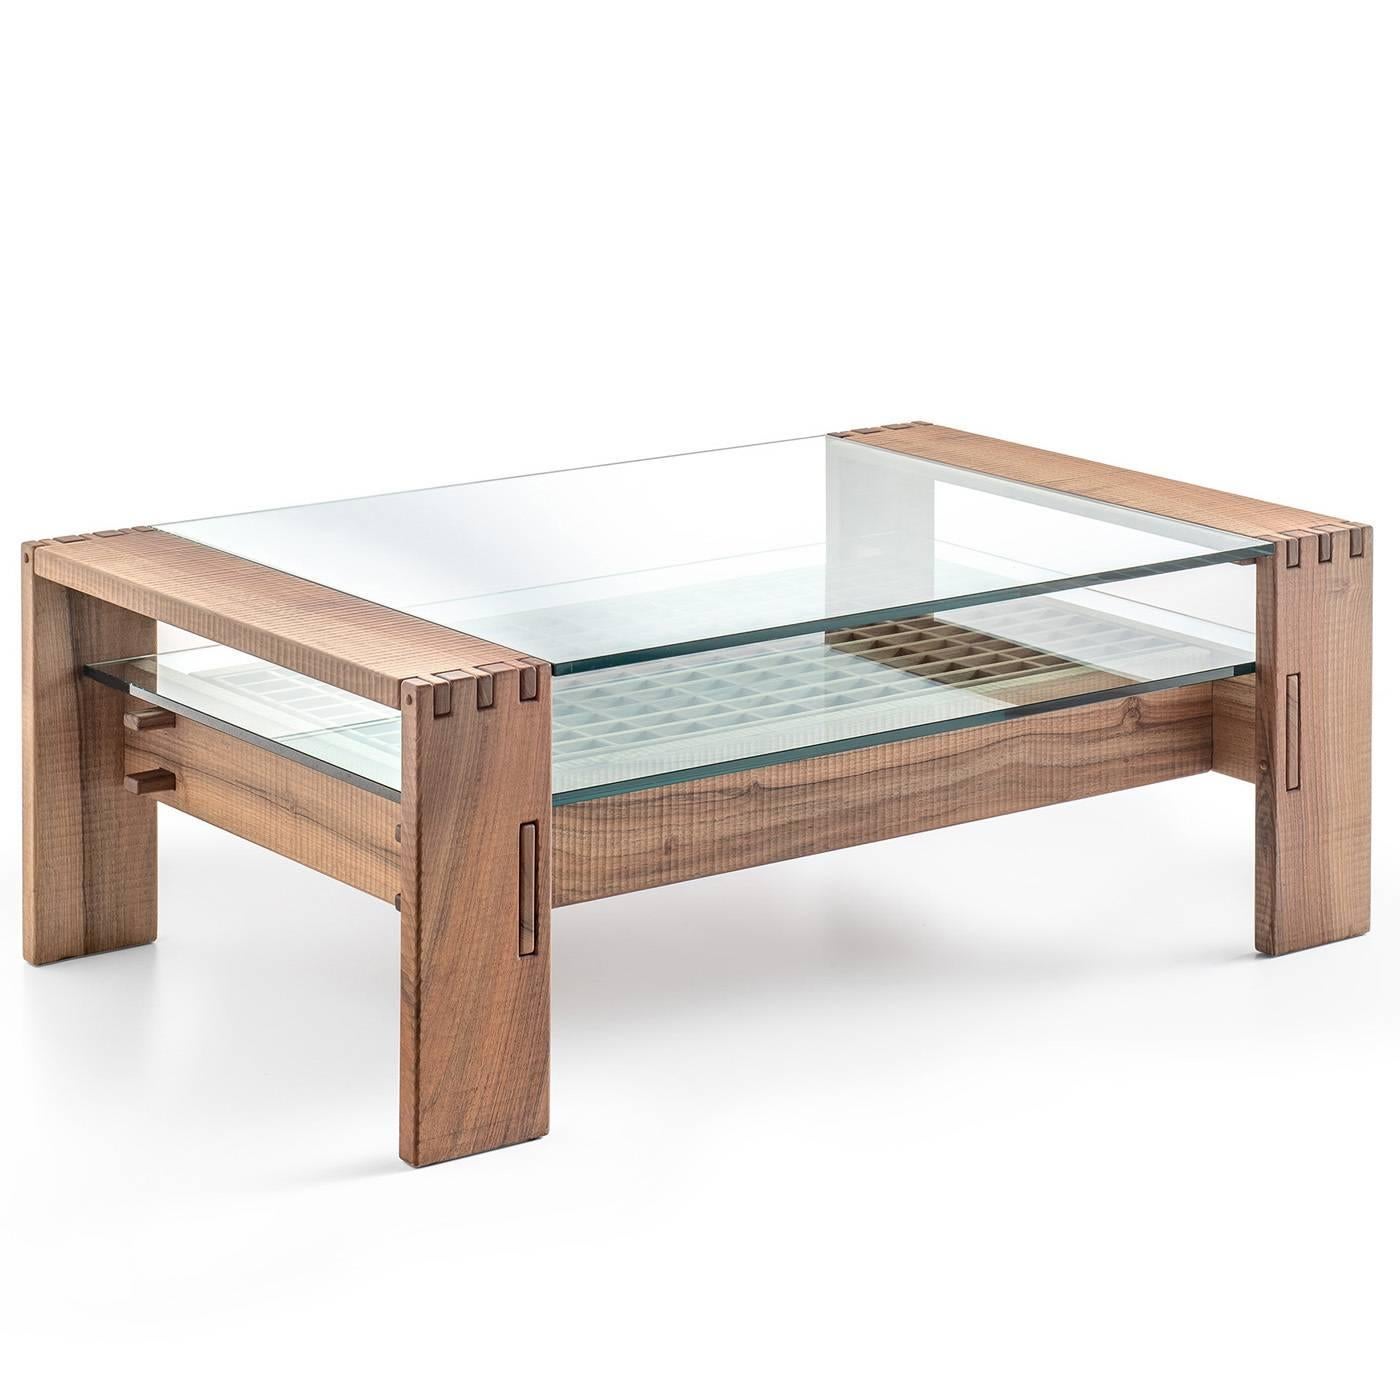 This elegant coffee table with drawer is entirely made in Italian walnut wood and hand-finished with a plane. The structure features interlocking pieces of wood with visible points and pins and a glass top that covers the bottom of the table